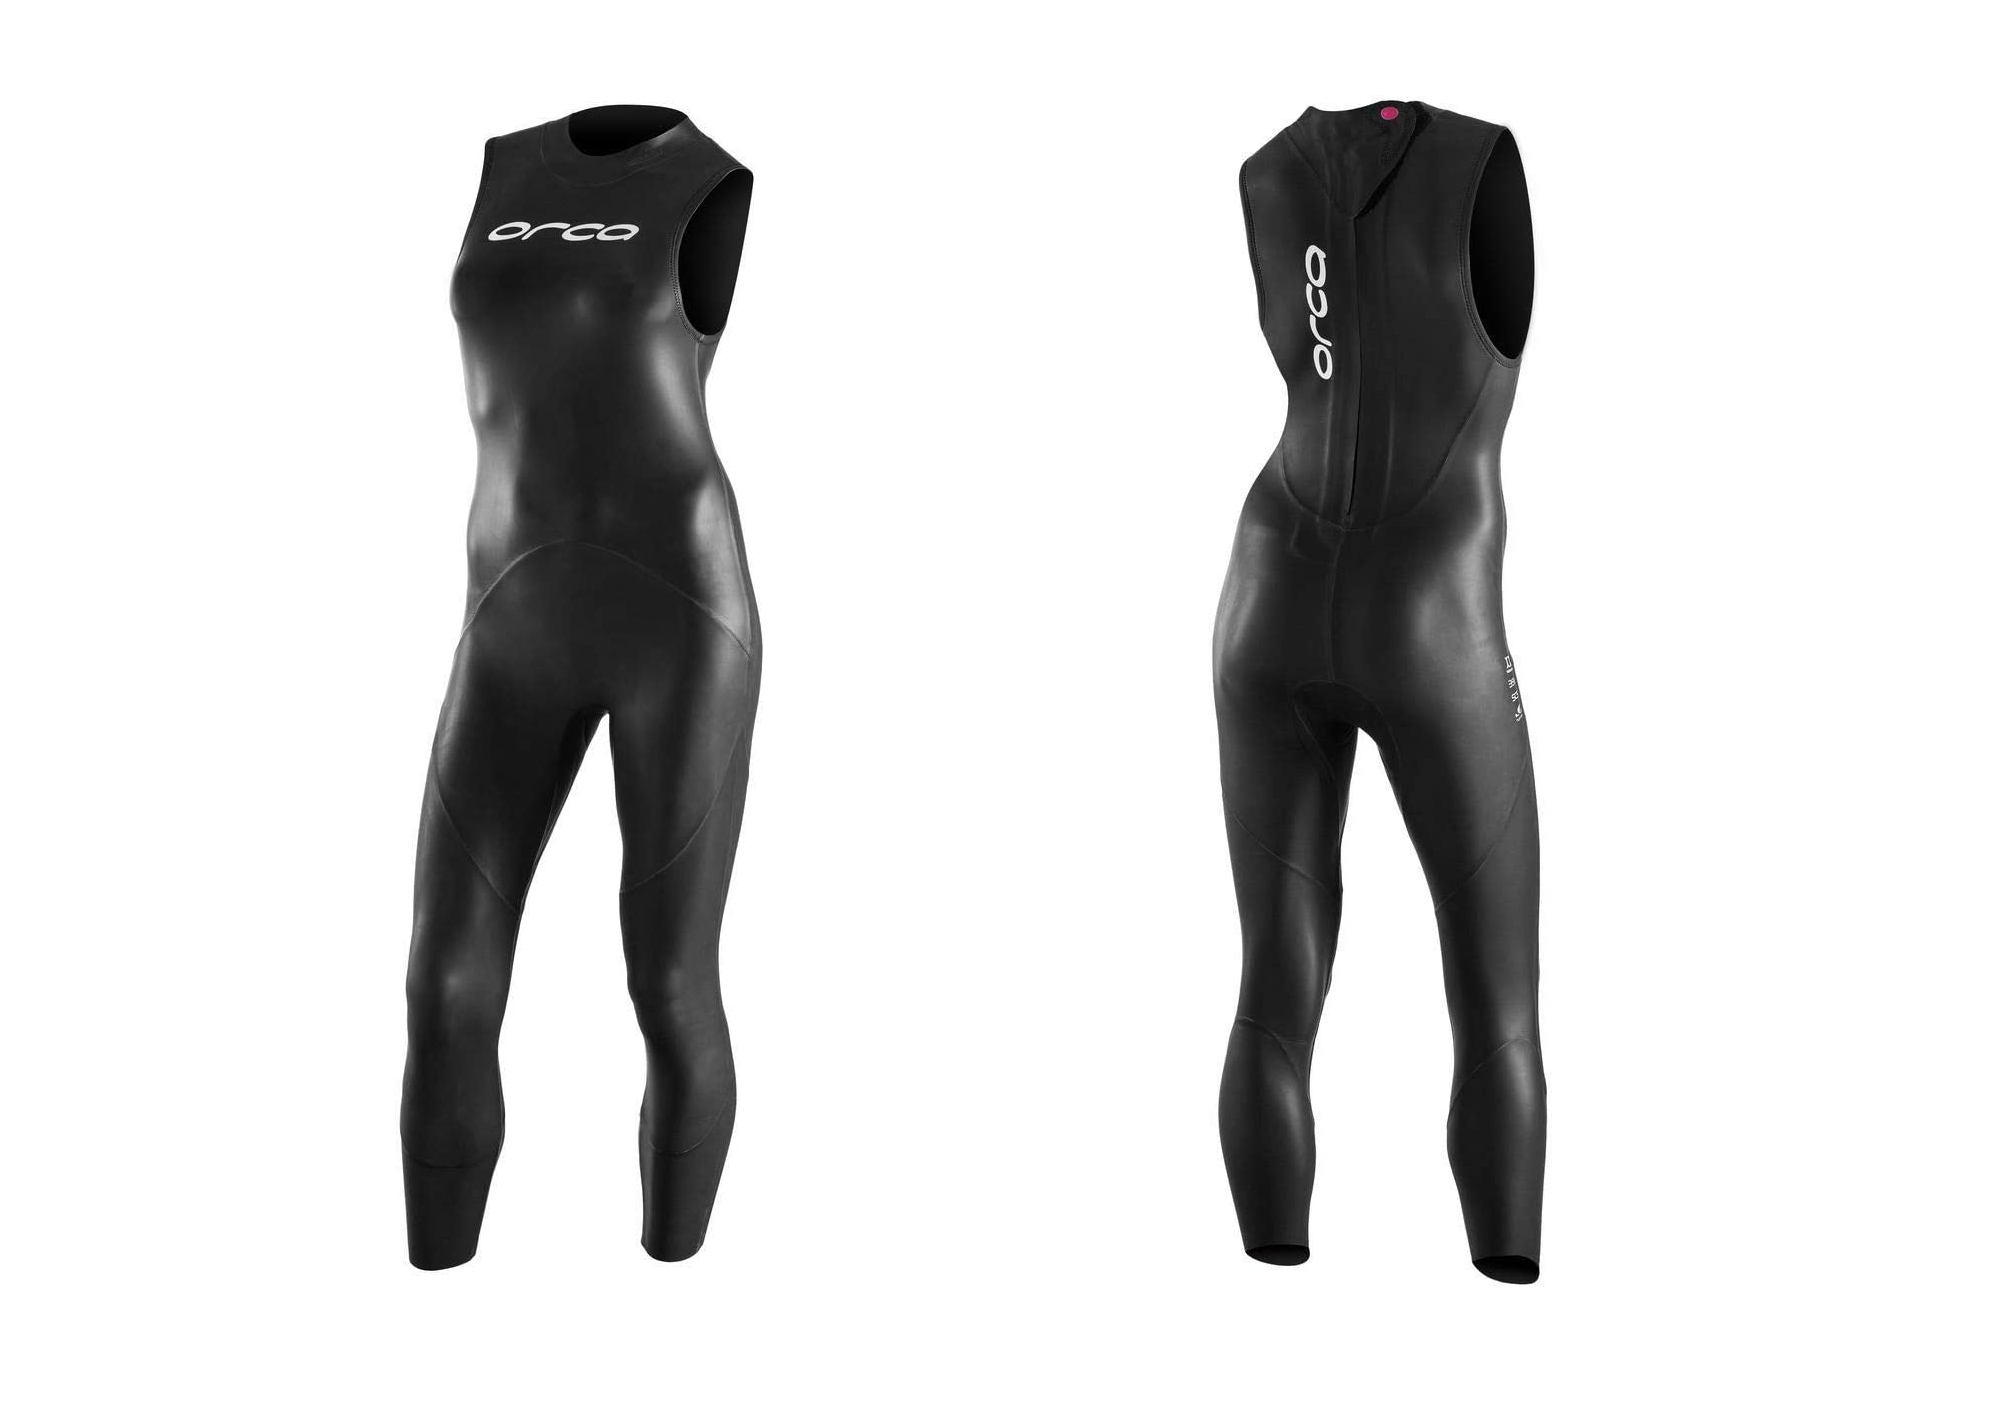 ORCA Openwater RS1 Sleeveless Tri Wetsuit Women's